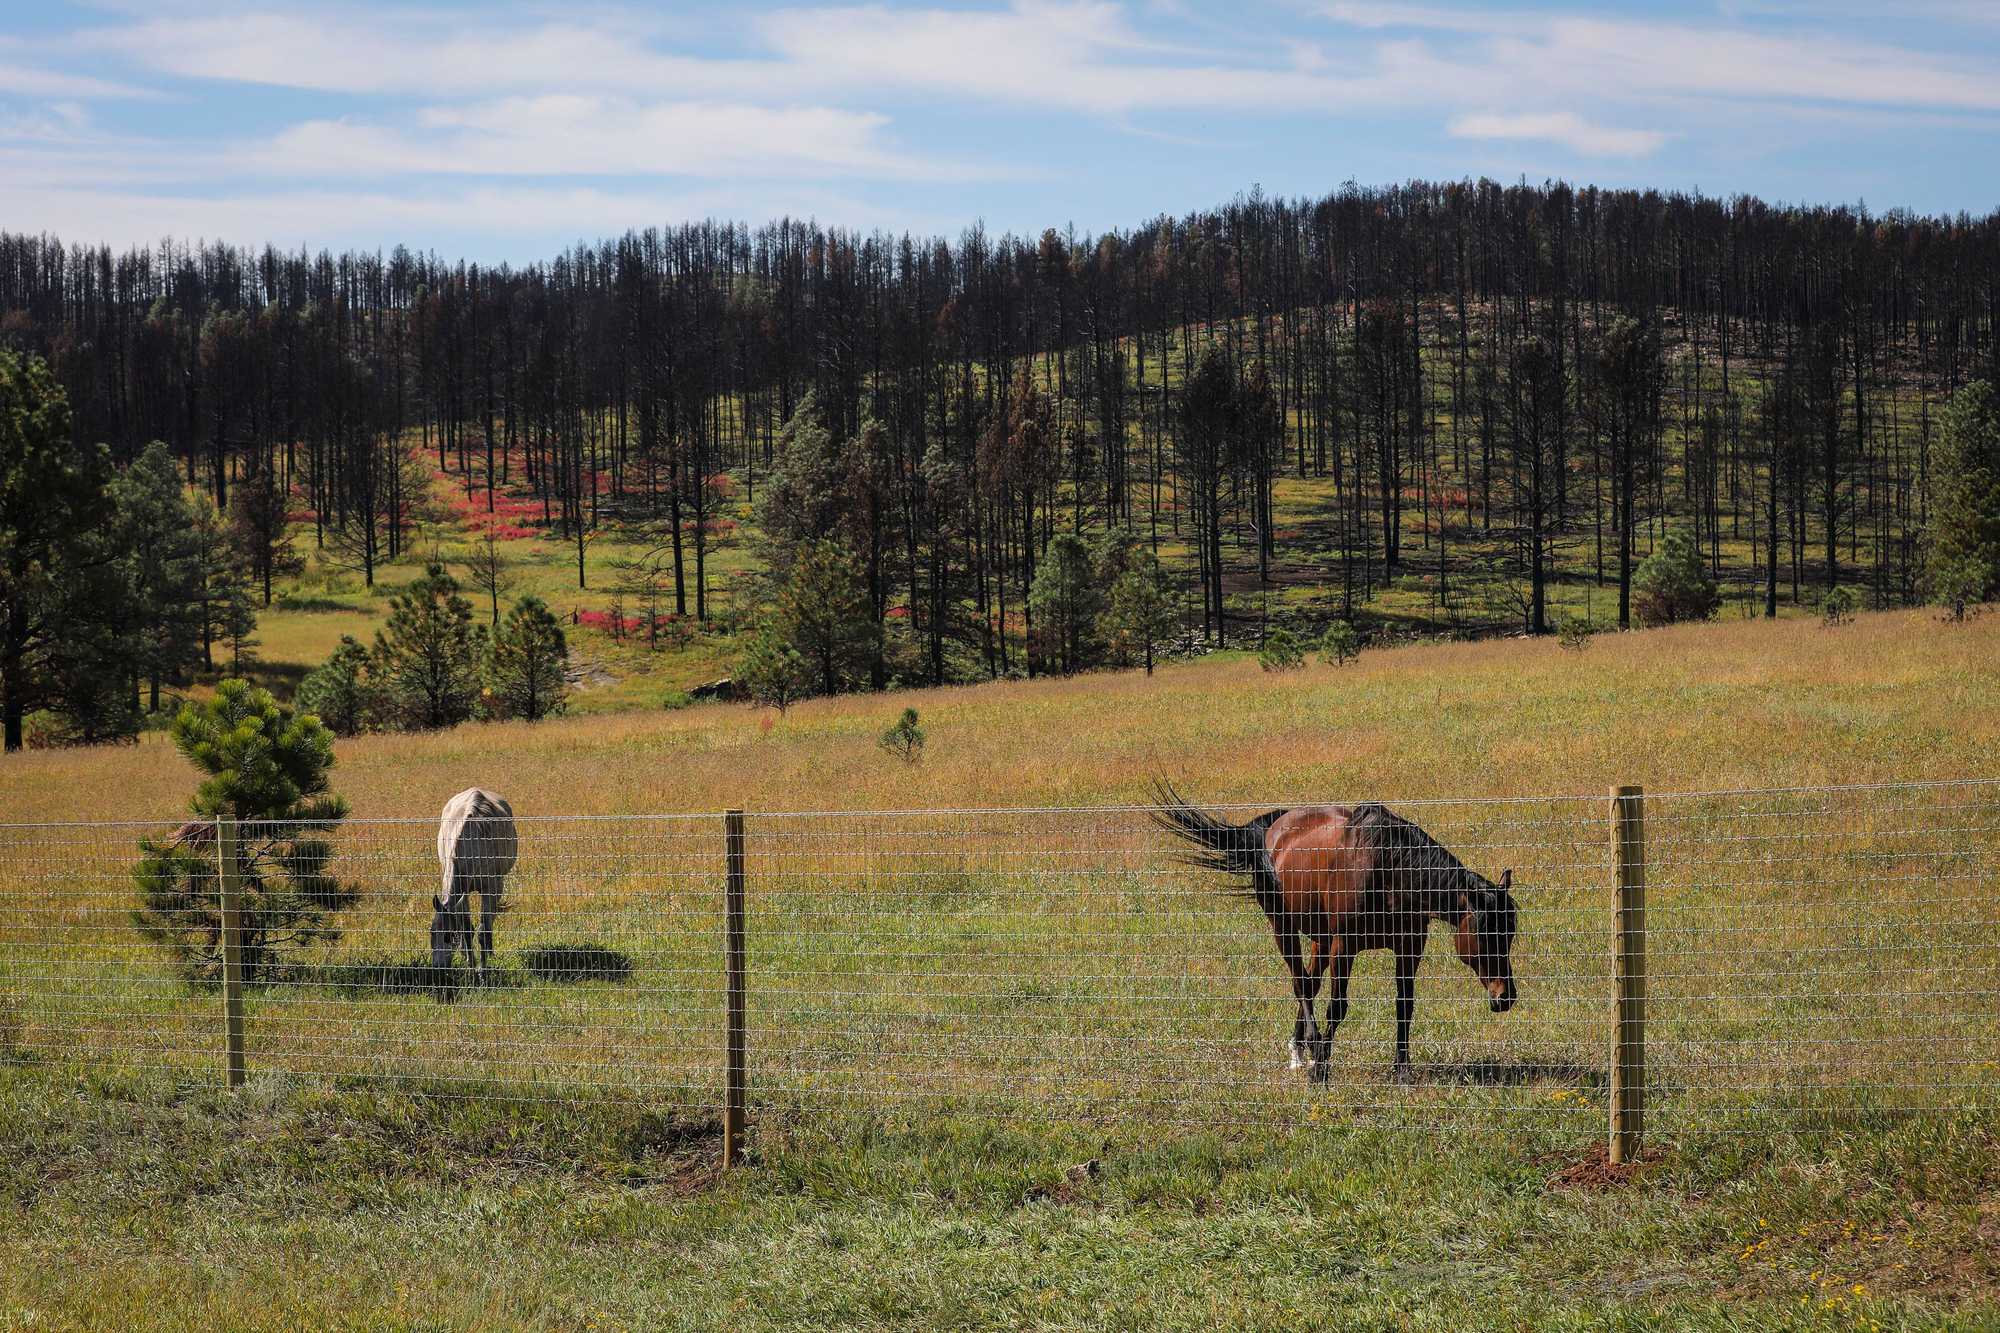 Horses graze near the site of the fire.